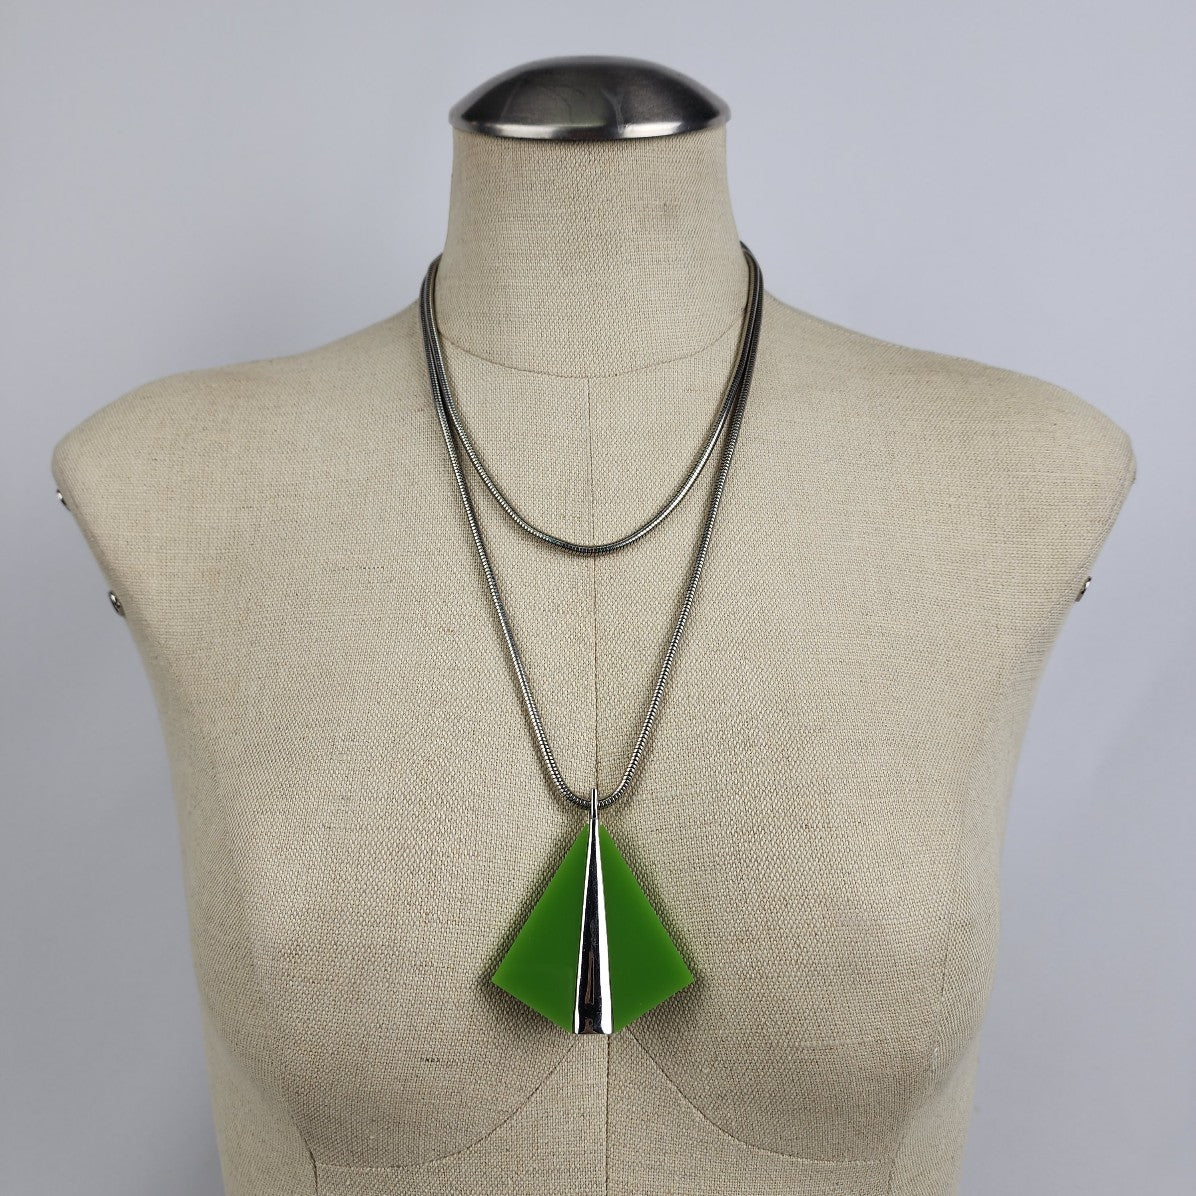 Vintage 70s Celebrity Green Lucite Pendant Snake Chain Necklace